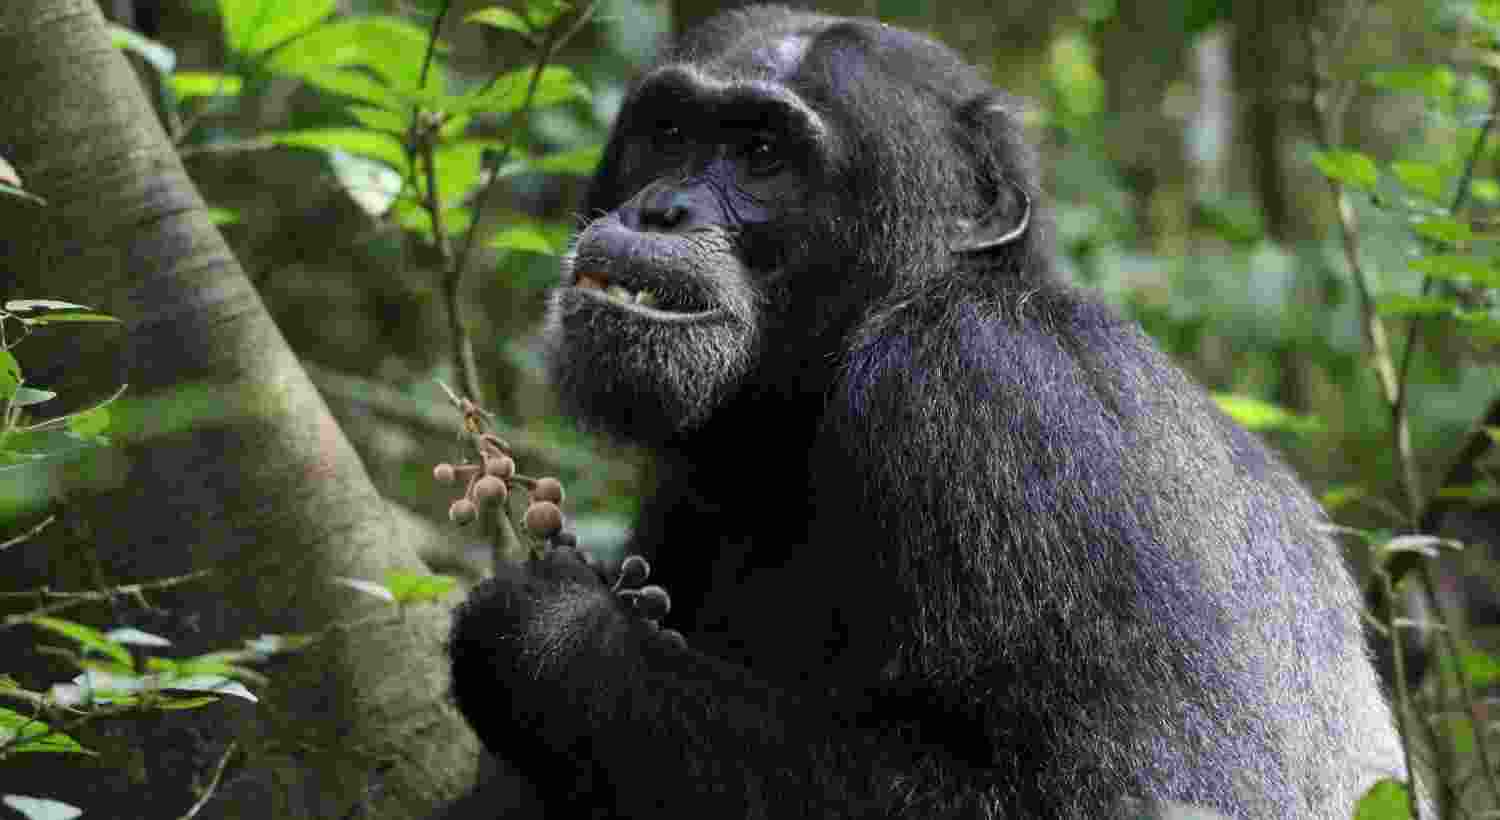 Chimps use medicinal plants to heal wounds: Study